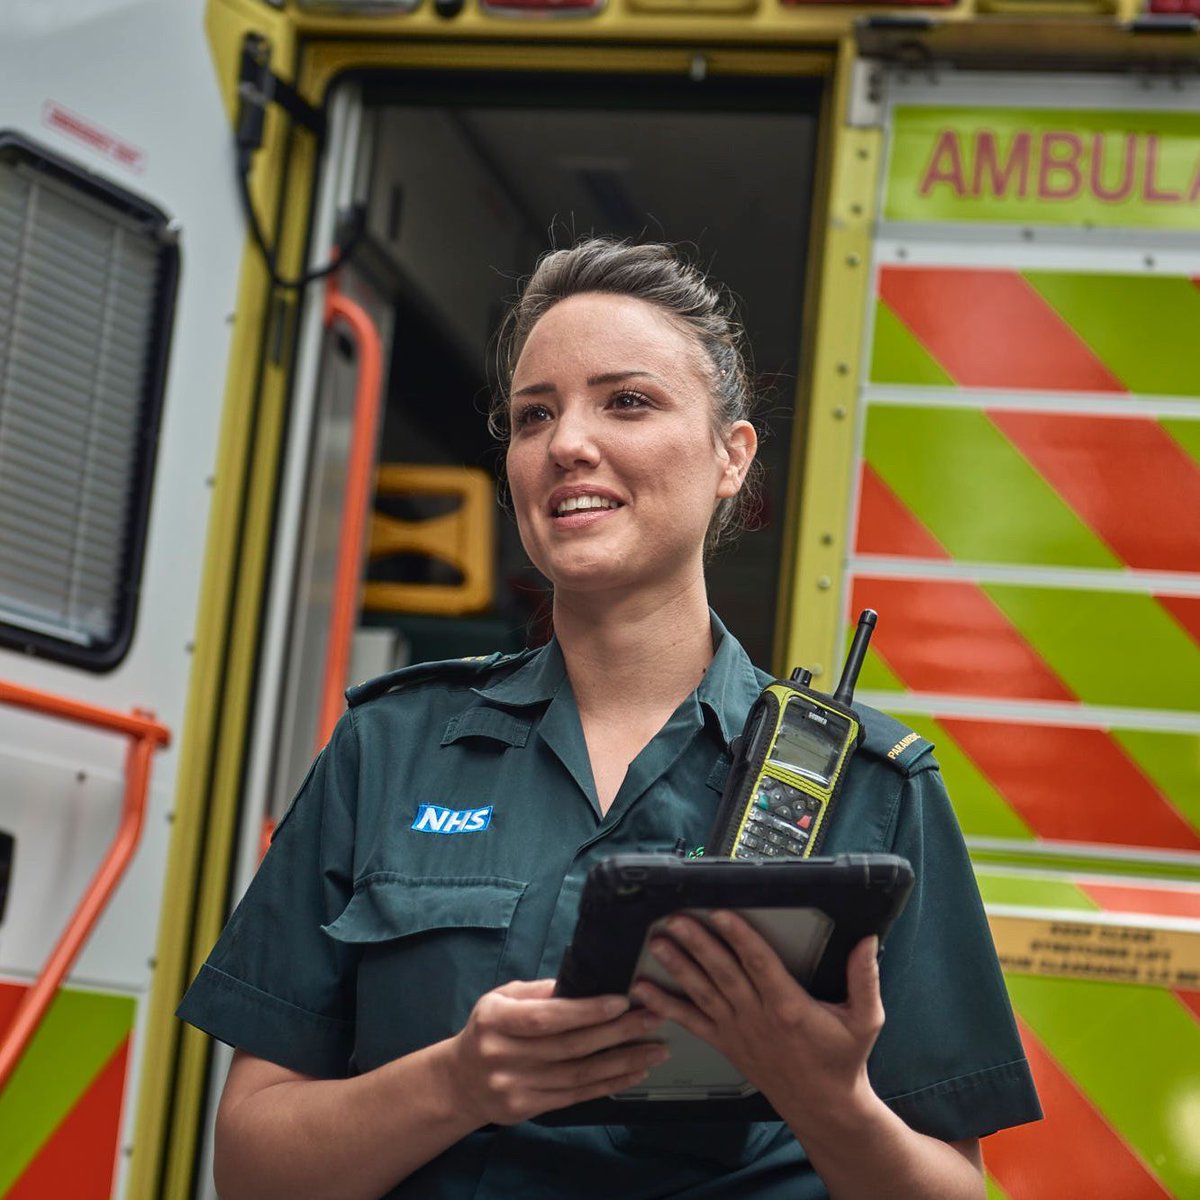 #JobAlert 🔽 We're looking for Qualified Paramedics to join #TeamLAS and help us save lives in London. Full details on #NHSJobs. buff.ly/44q38uN